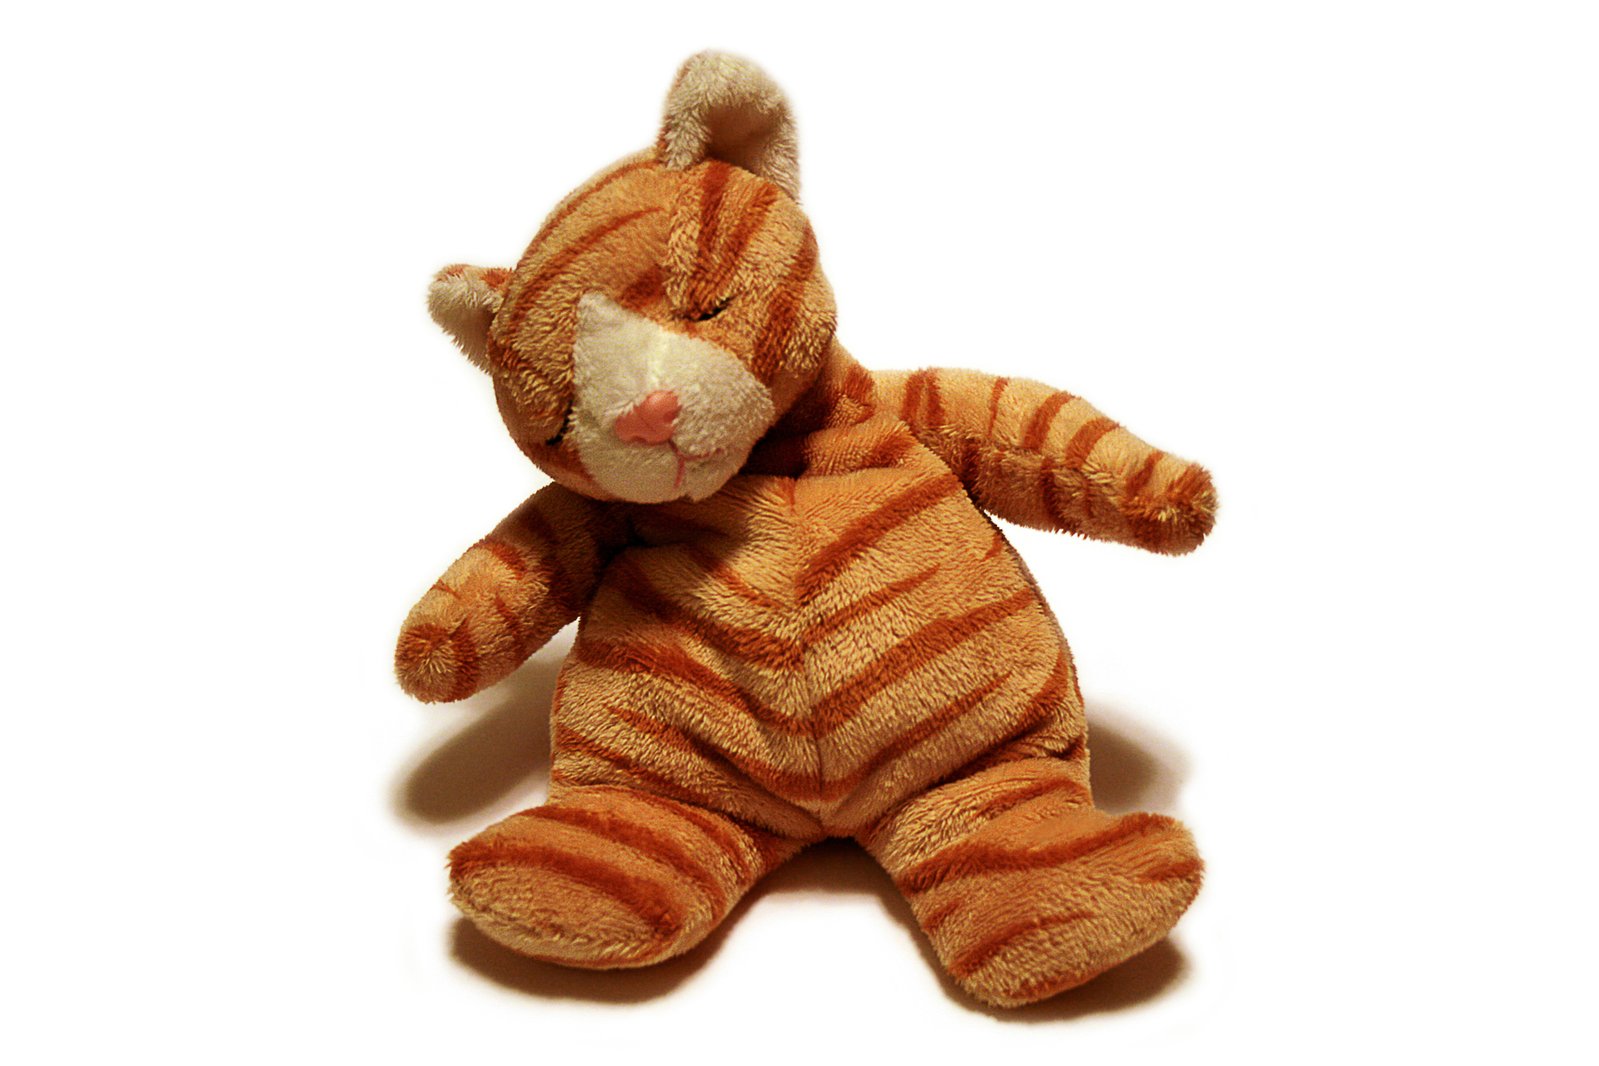 the teddy bear is very cute with a striped pattern